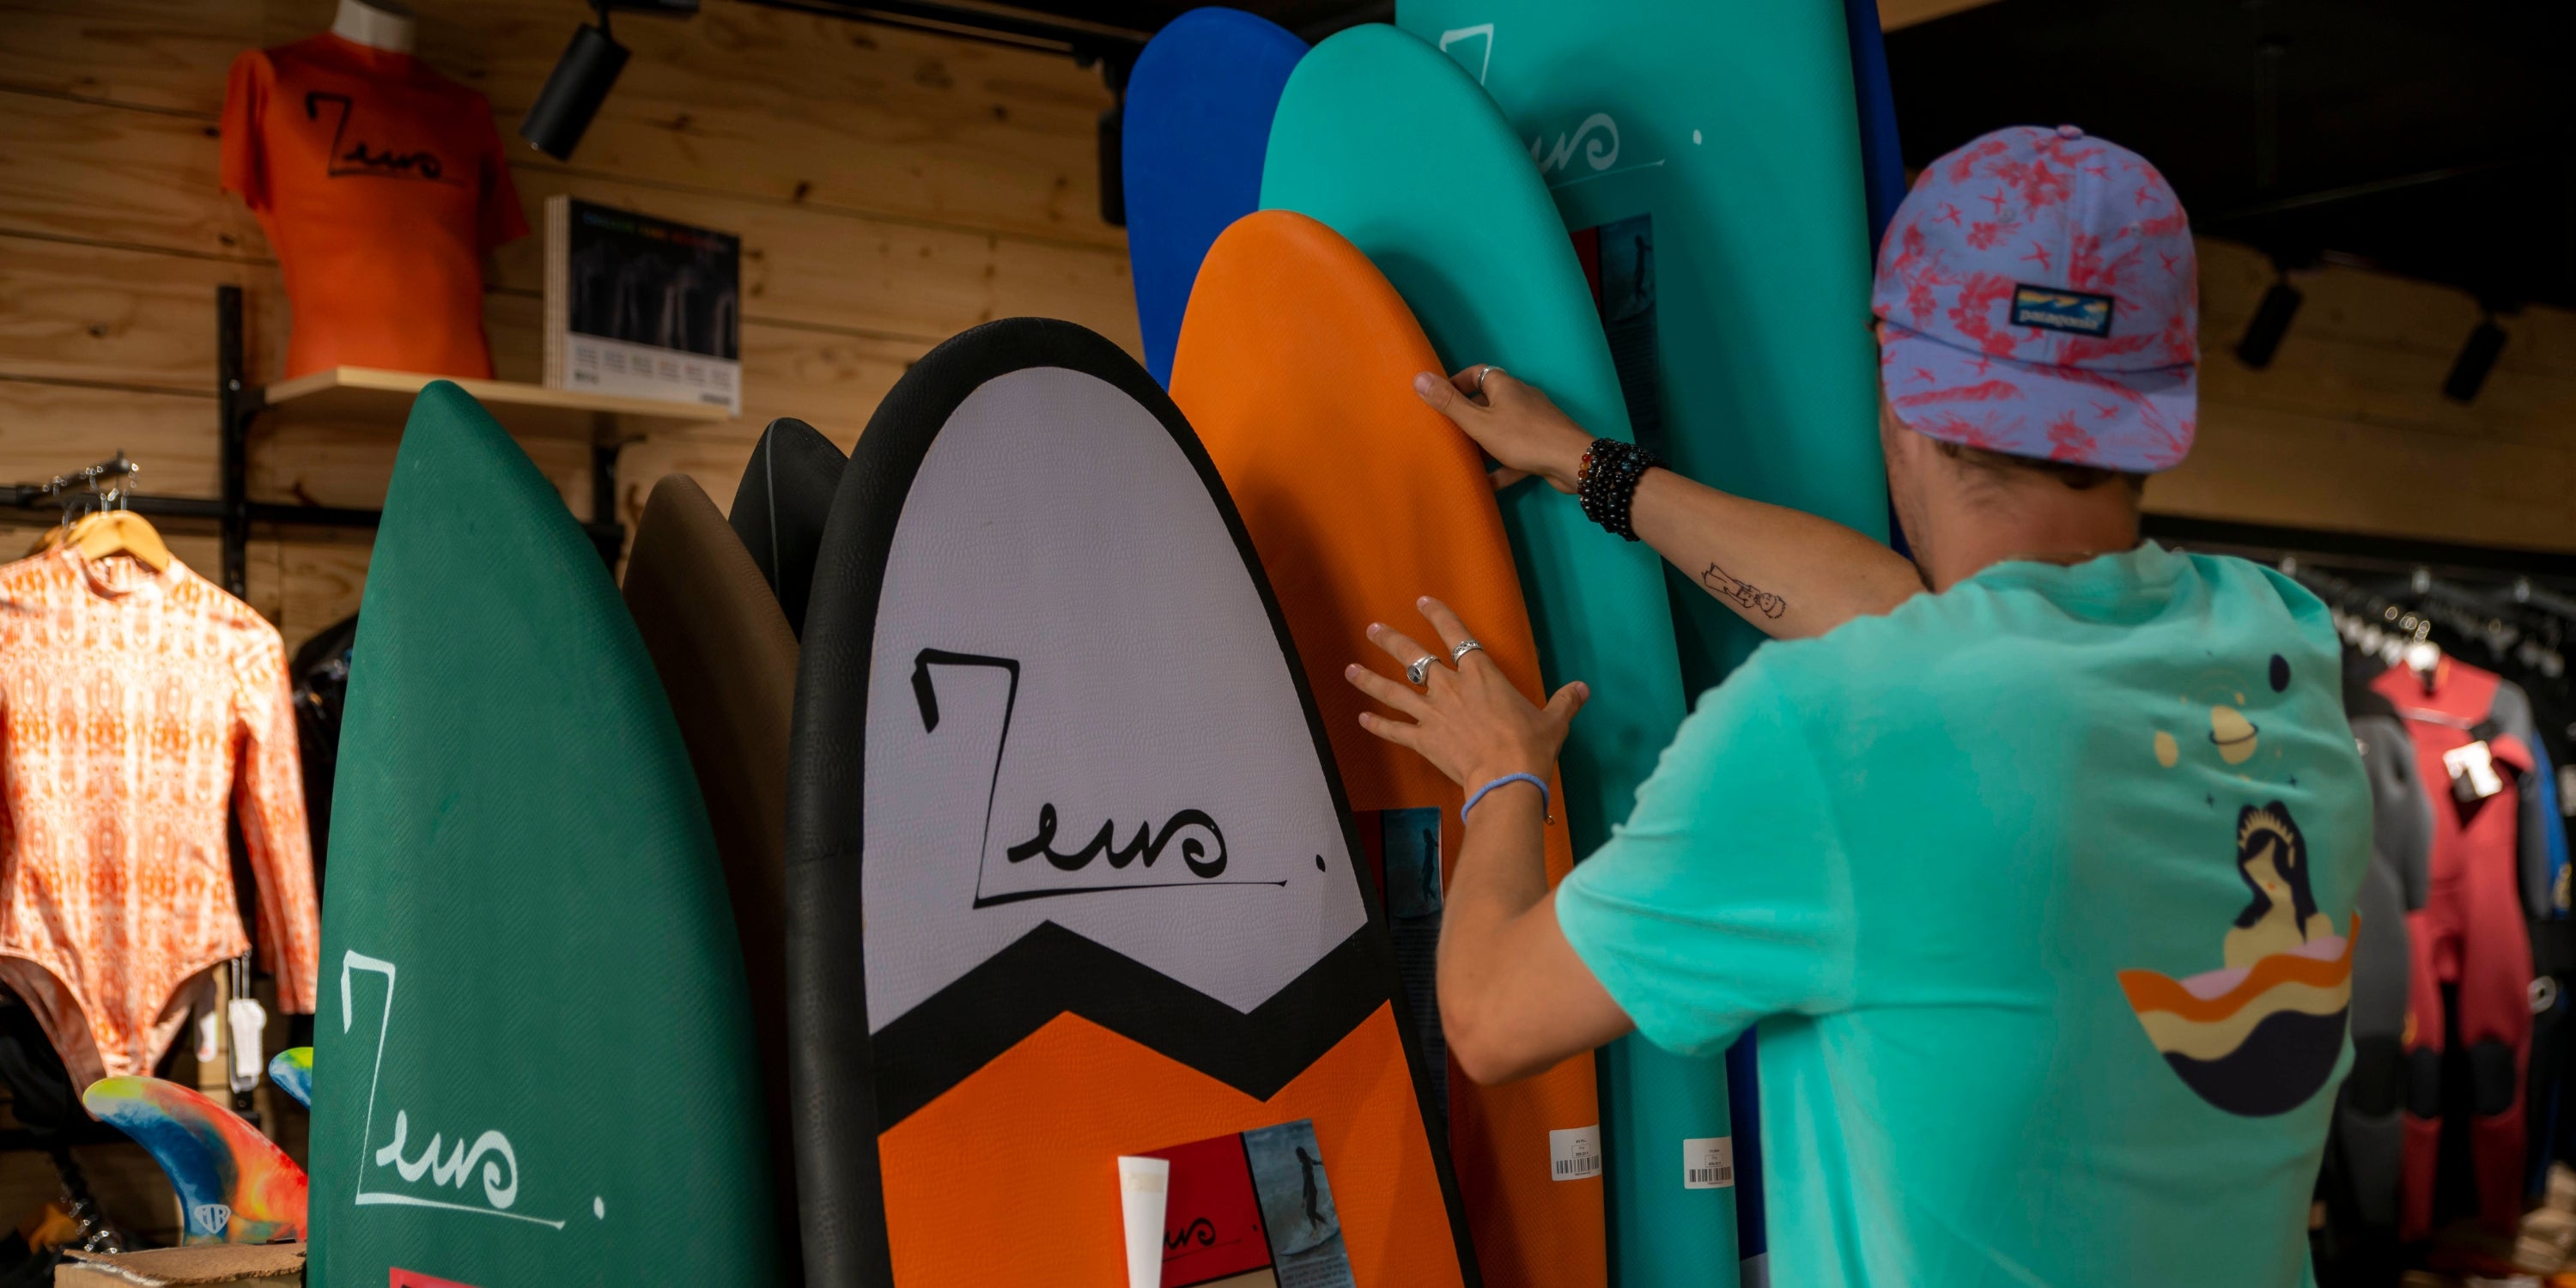 Choosing the right surfboard